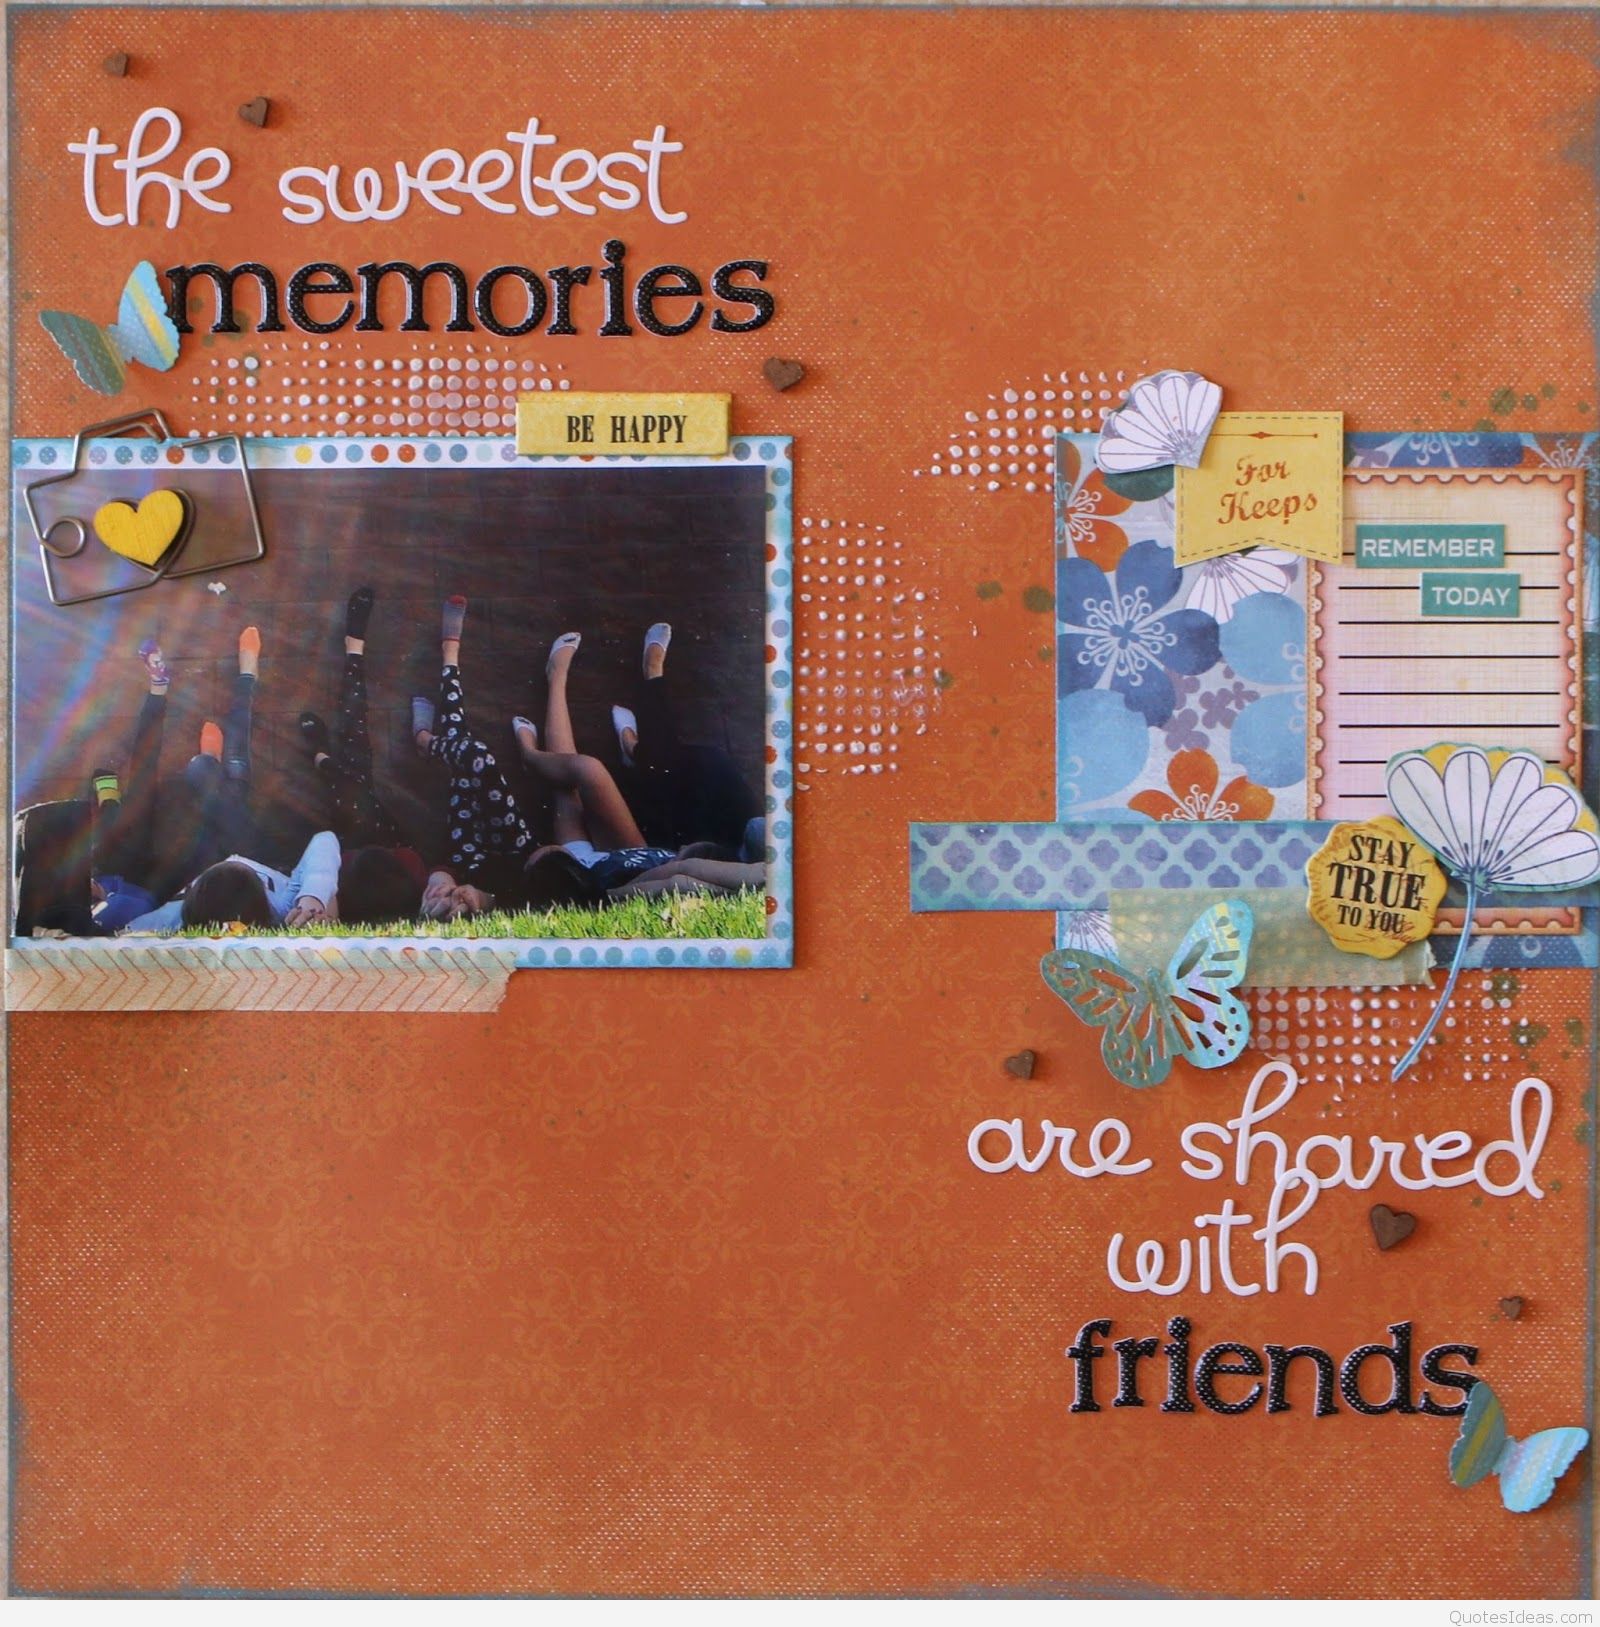 Sweet Memories Card Wallpaper Quote With Friends - Book - HD Wallpaper 